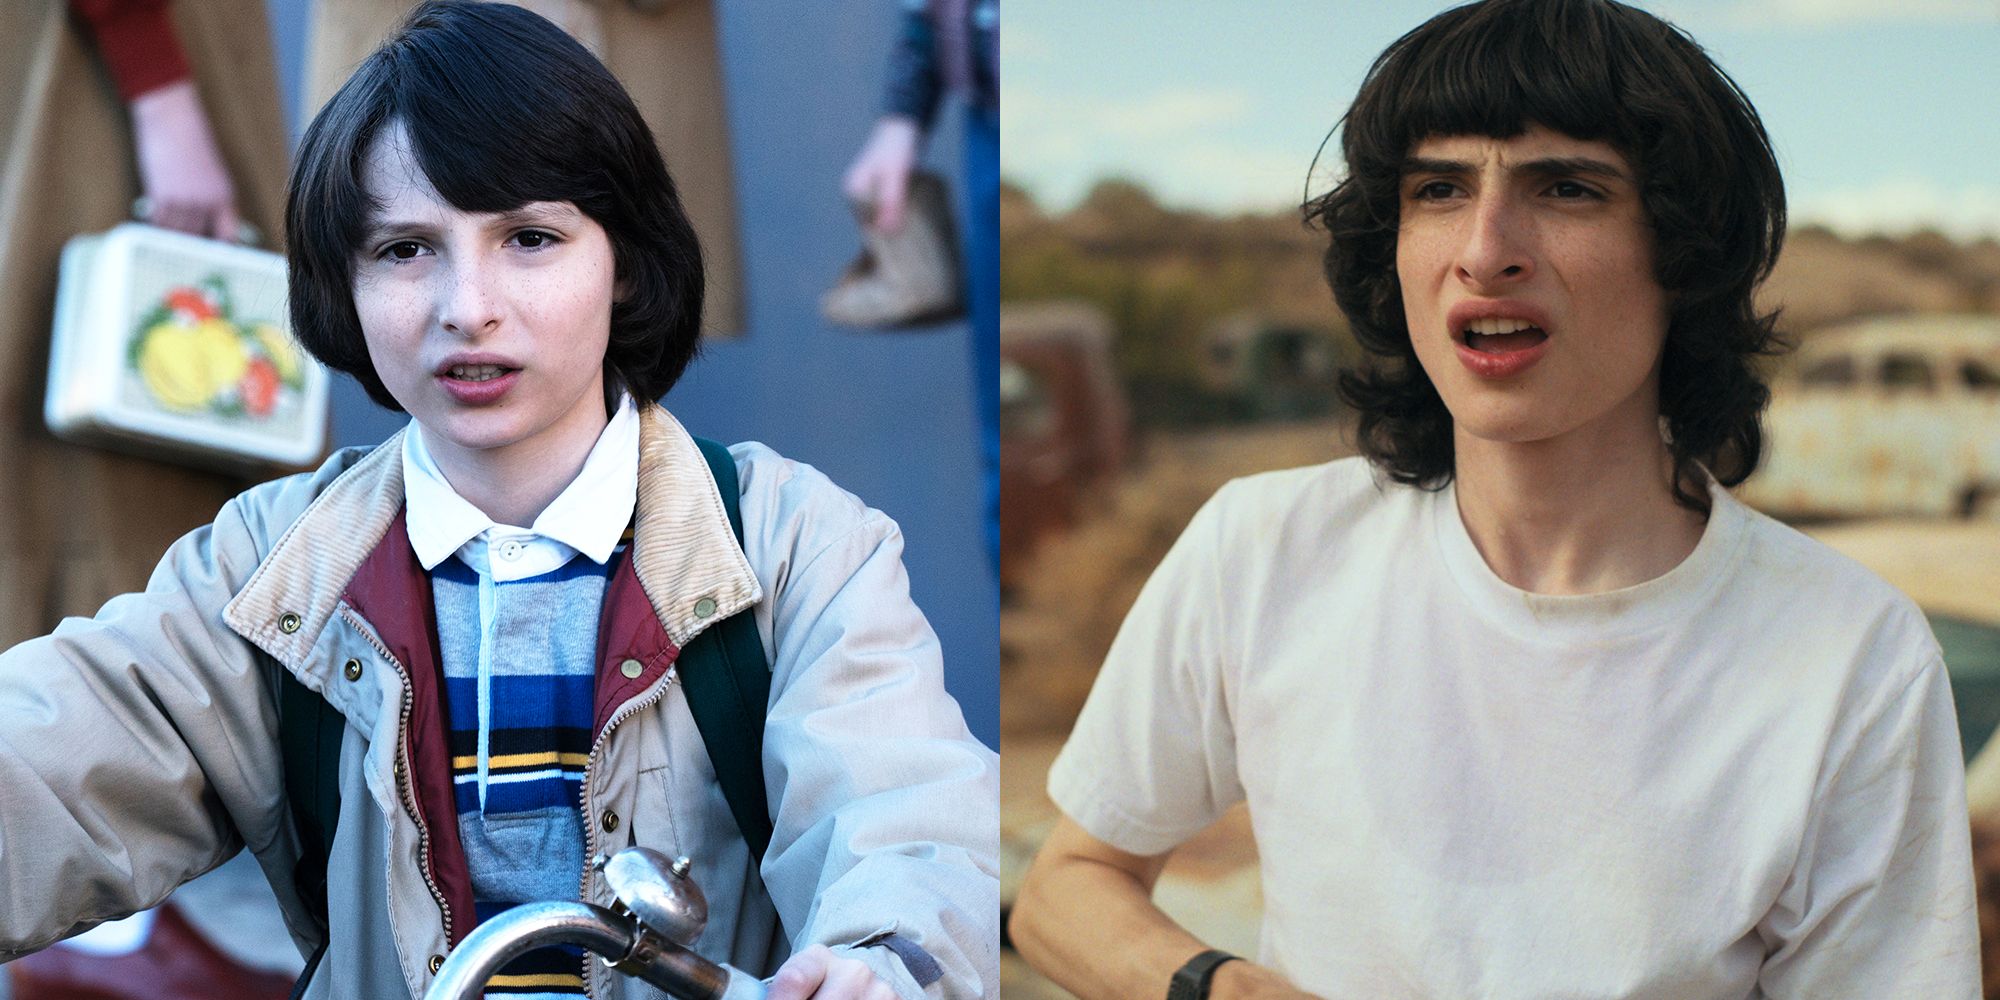 See Every Kid in the Stranger Things Cast, Then and